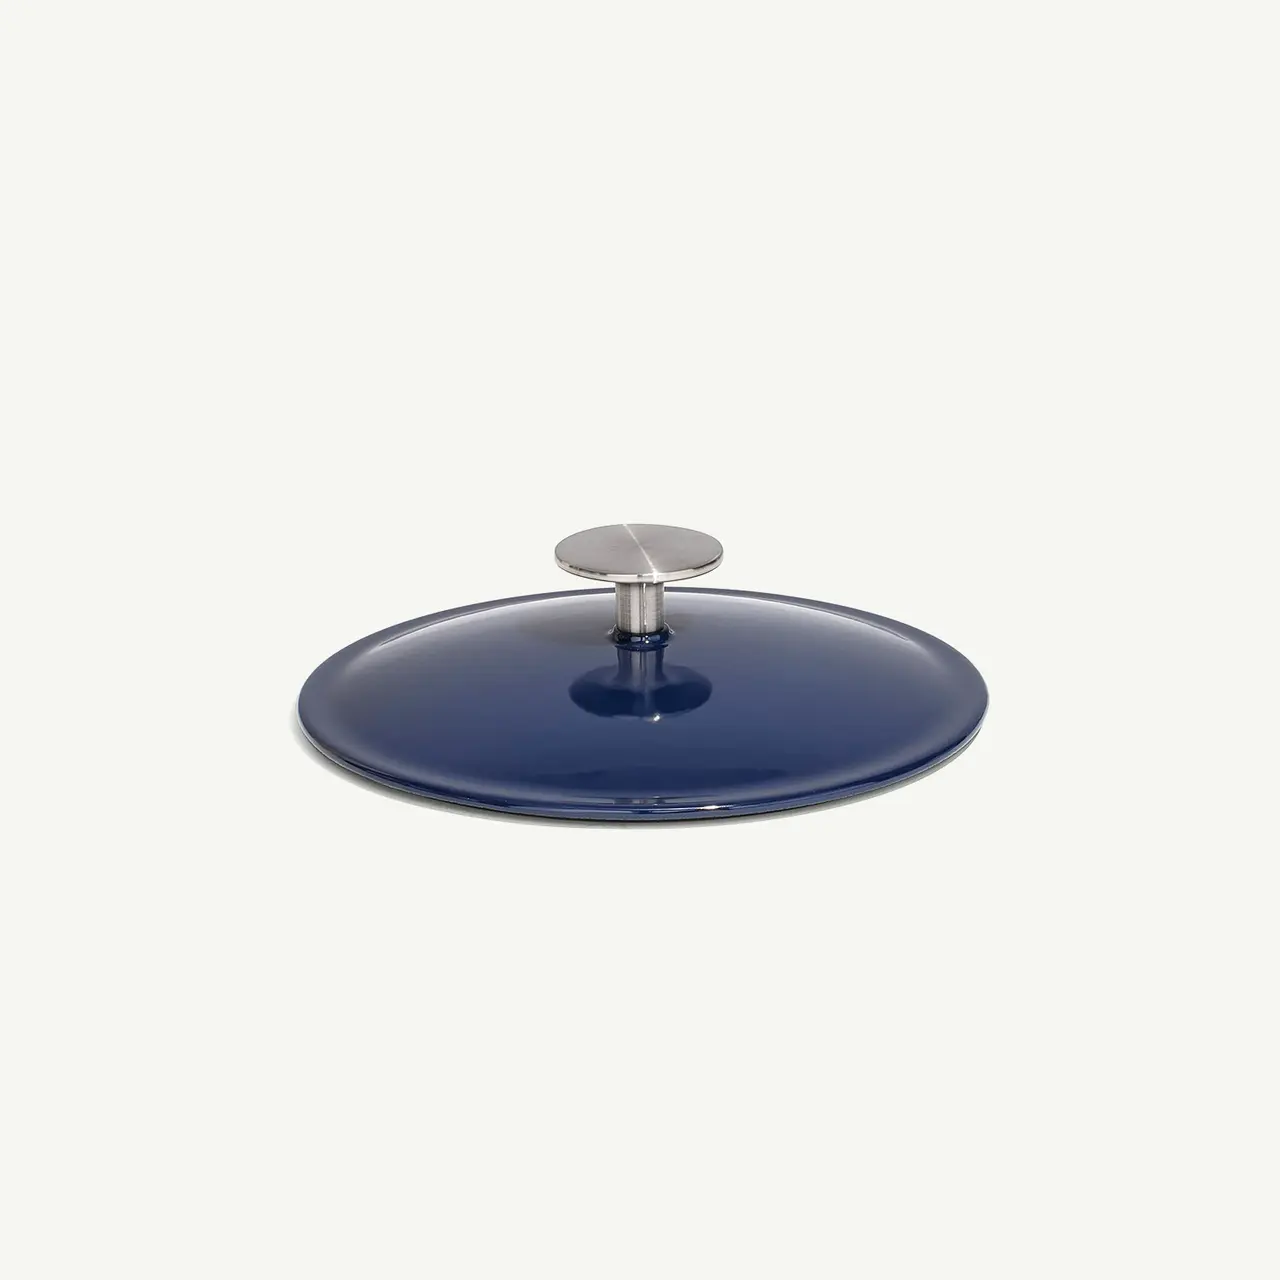 A blue, round lid with a silver knob on top isolated on a white background.